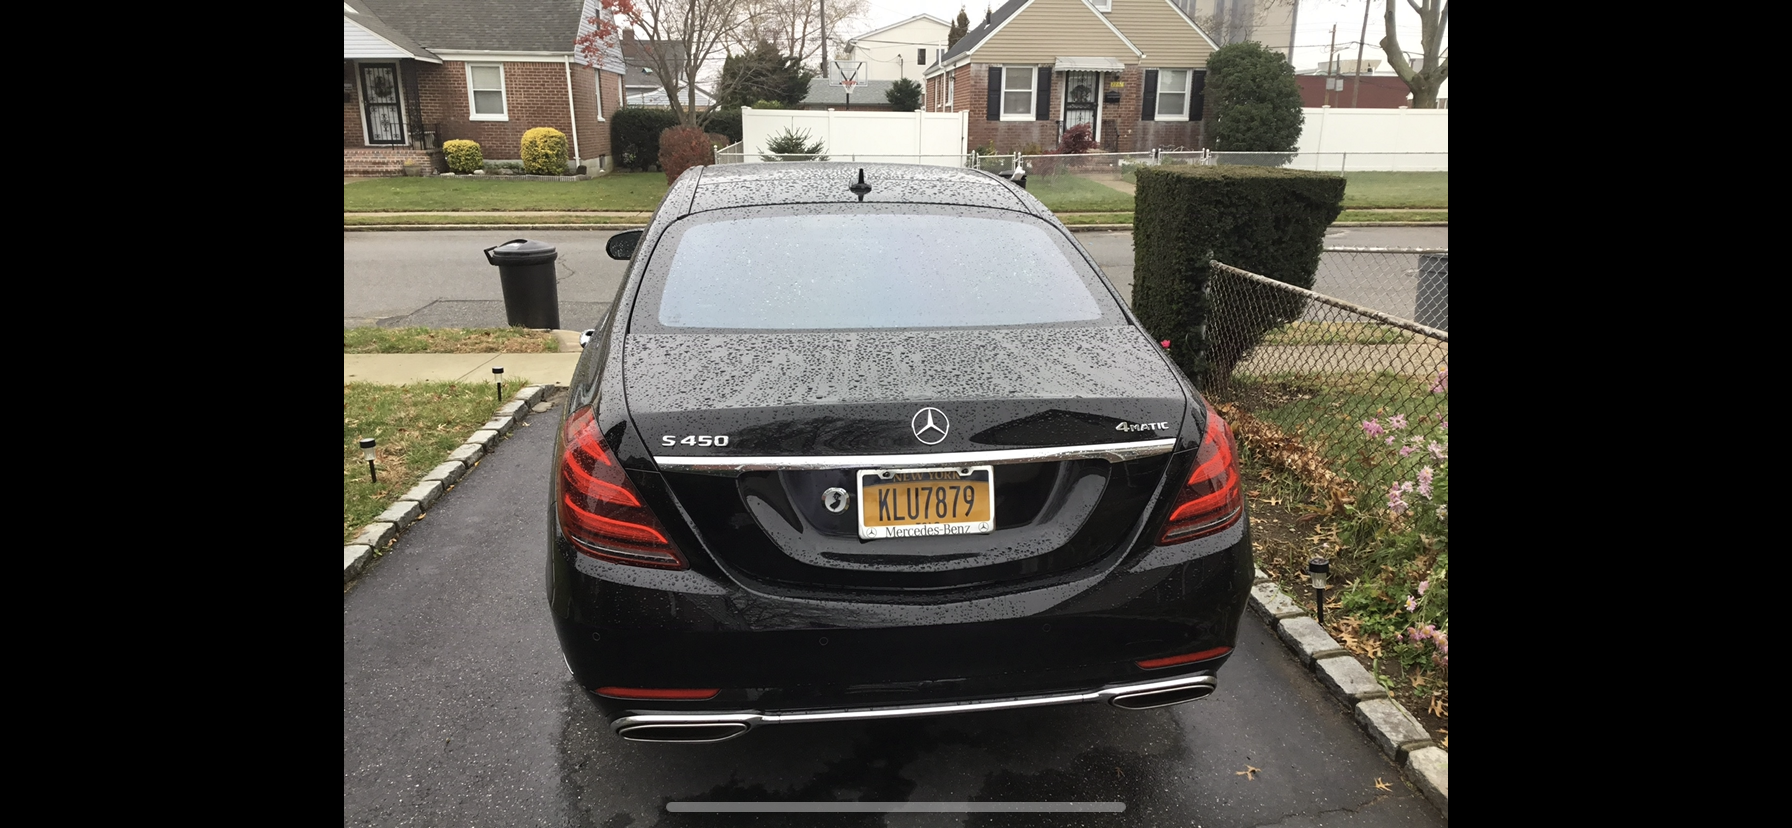 MERCEDES S550
Sedan /
Jersey City, NJ

 / Hourly $0.00
 / Hourly (Other services) $85.00
 / Airport Transfer $175.00
